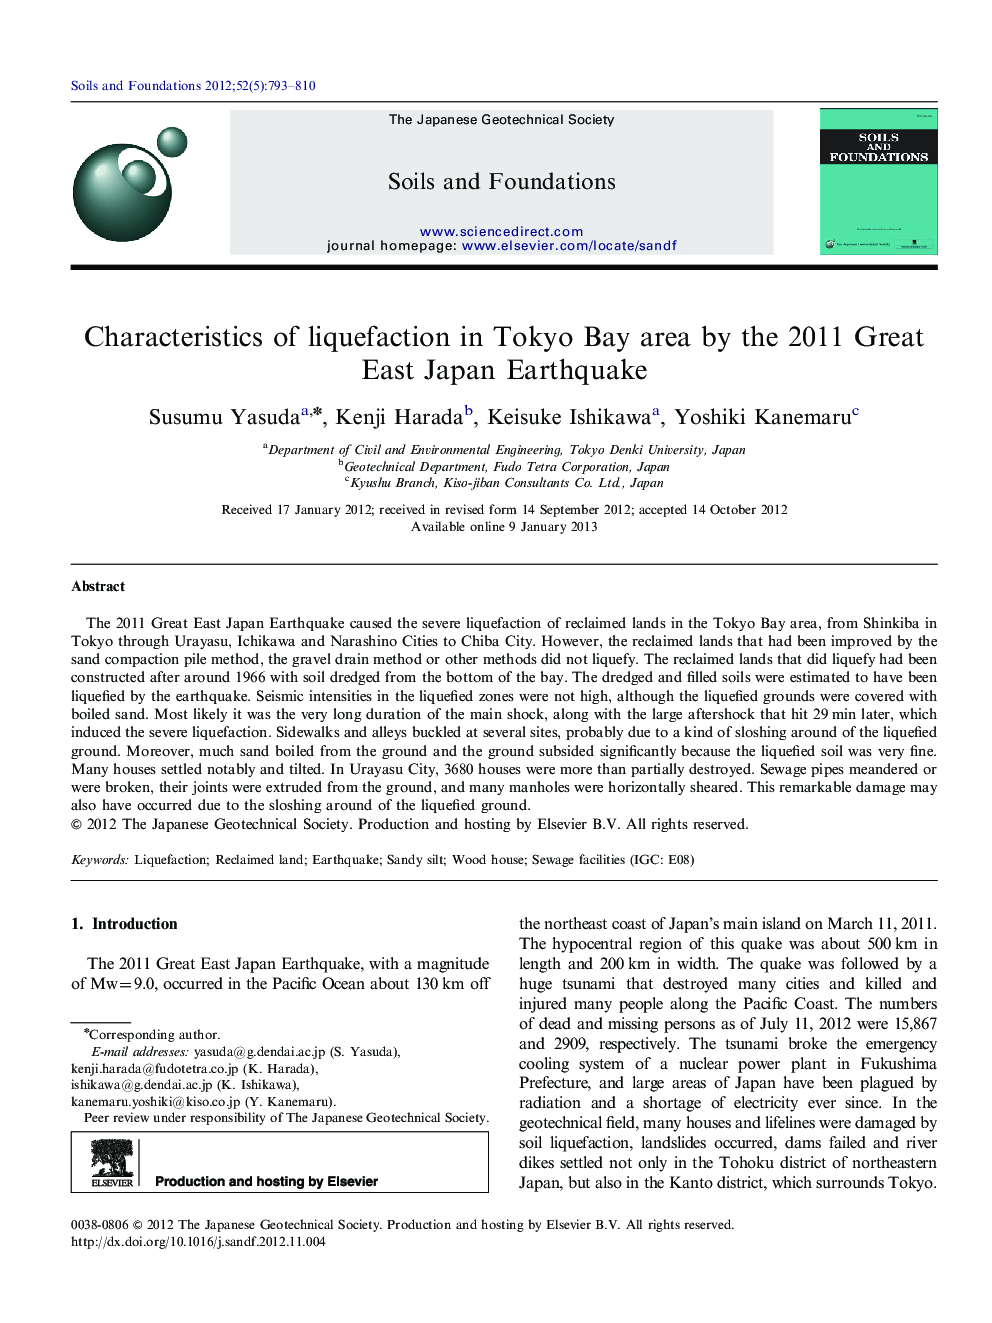 Characteristics of liquefaction in Tokyo Bay area by the 2011 Great East Japan Earthquake